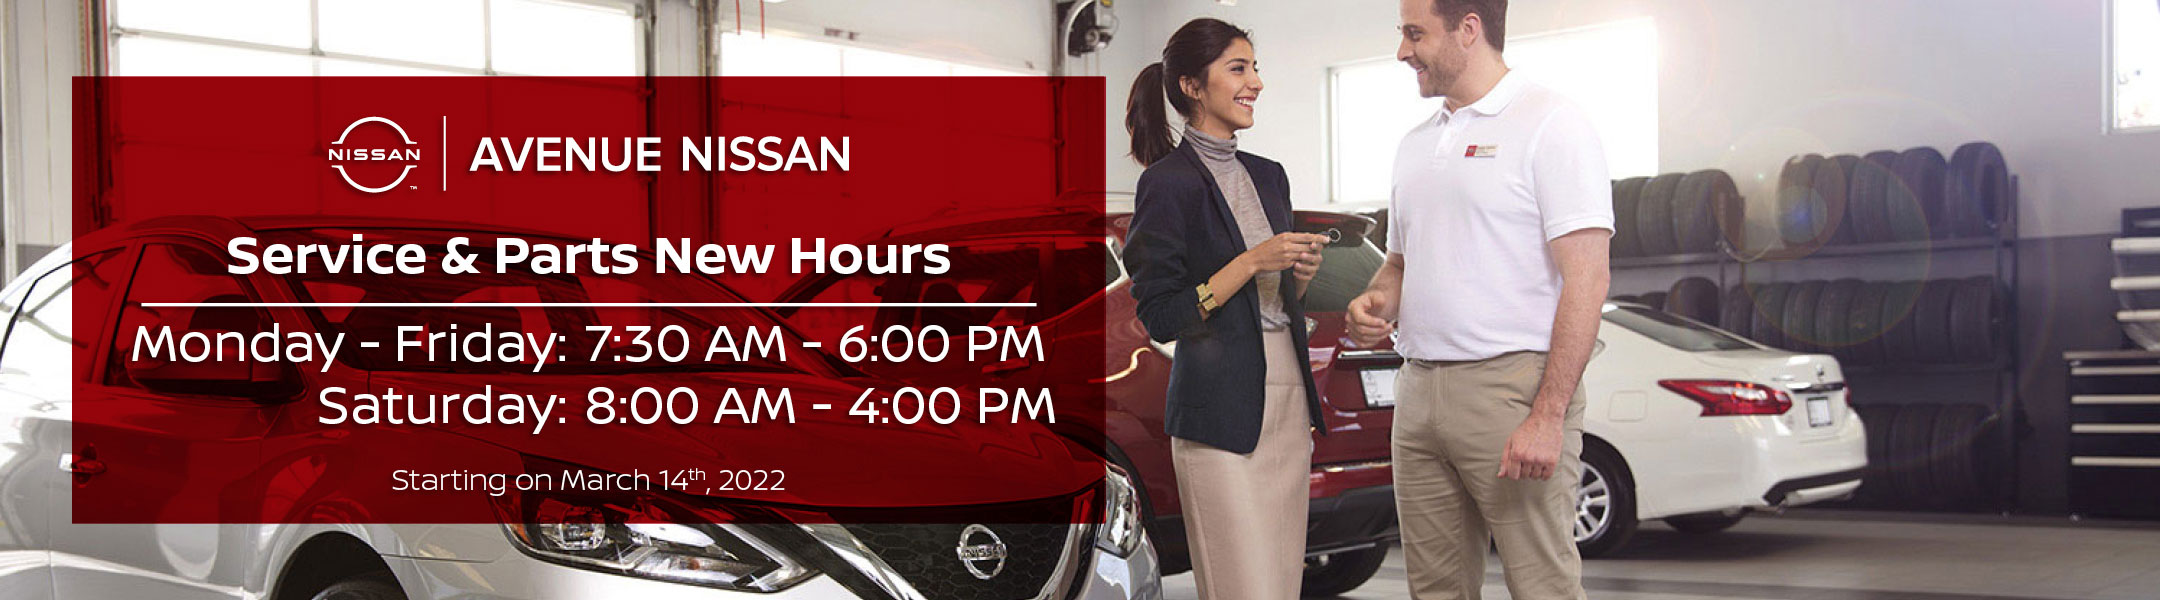 Avenue Nissan Updated Hours